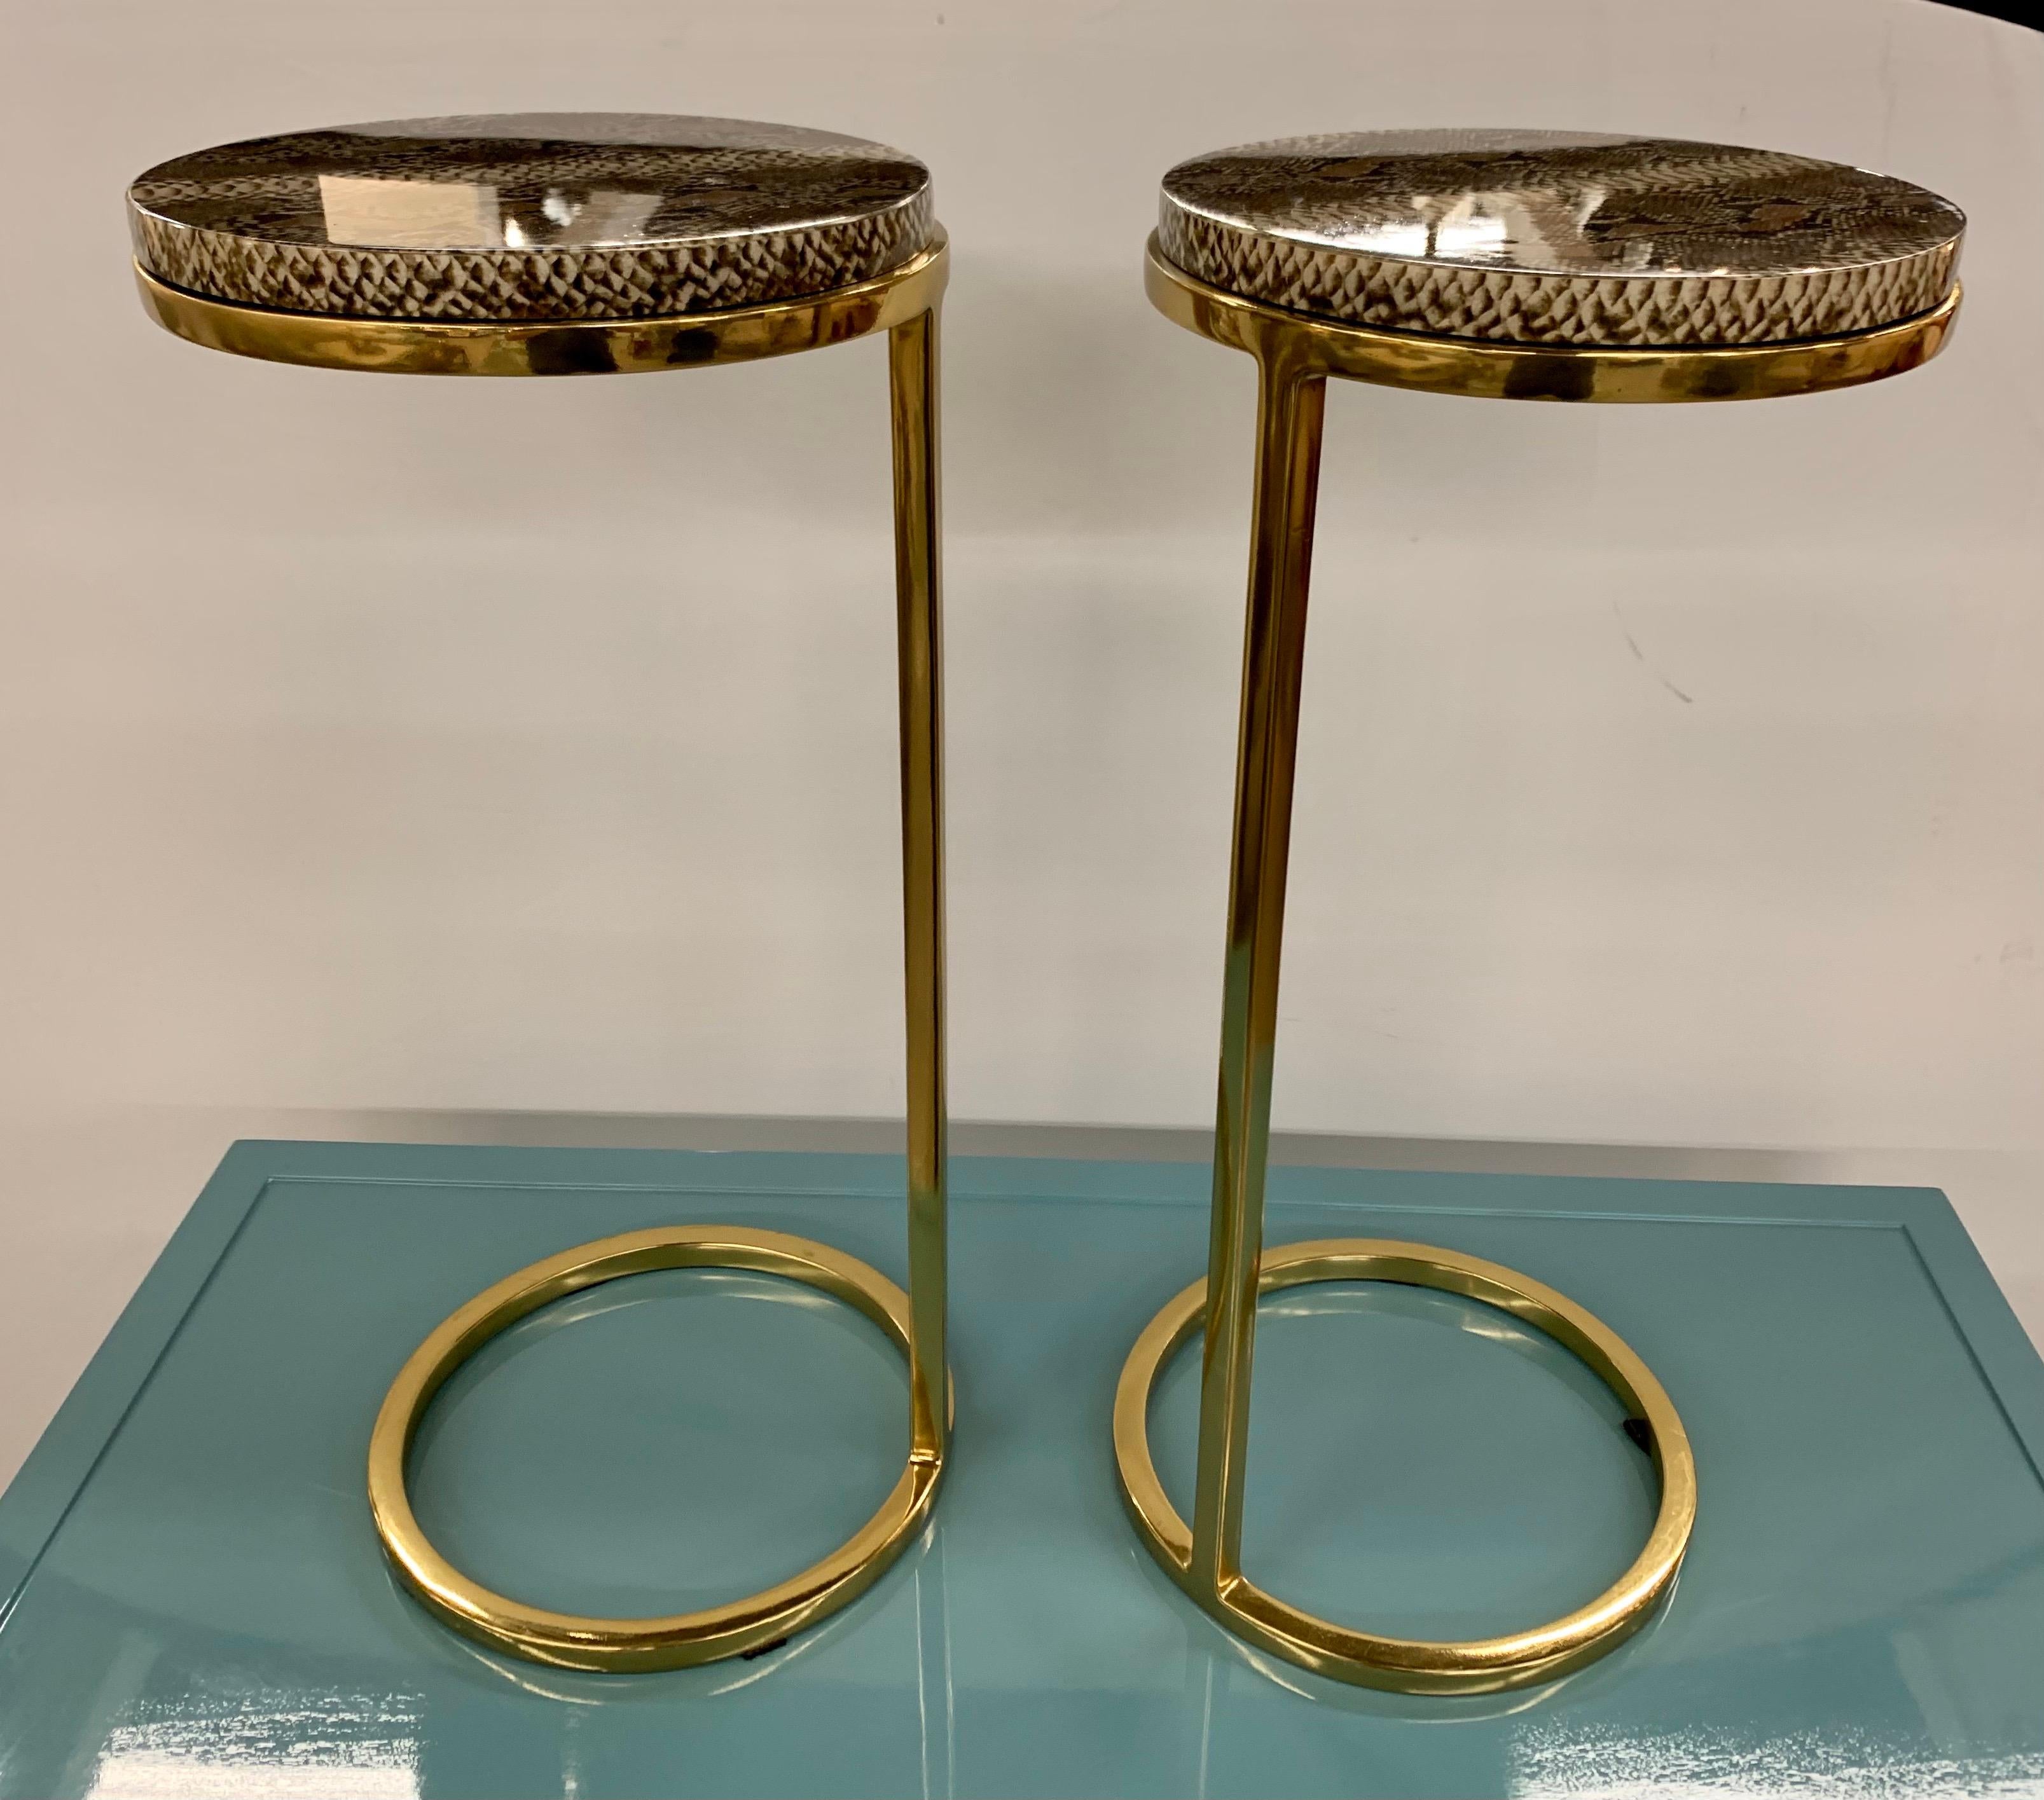 Elegant pair of brass and snakeskin design on resin cigarette table with circular top. Great lines and better scale. Now, more than ever, home is where the heart is.